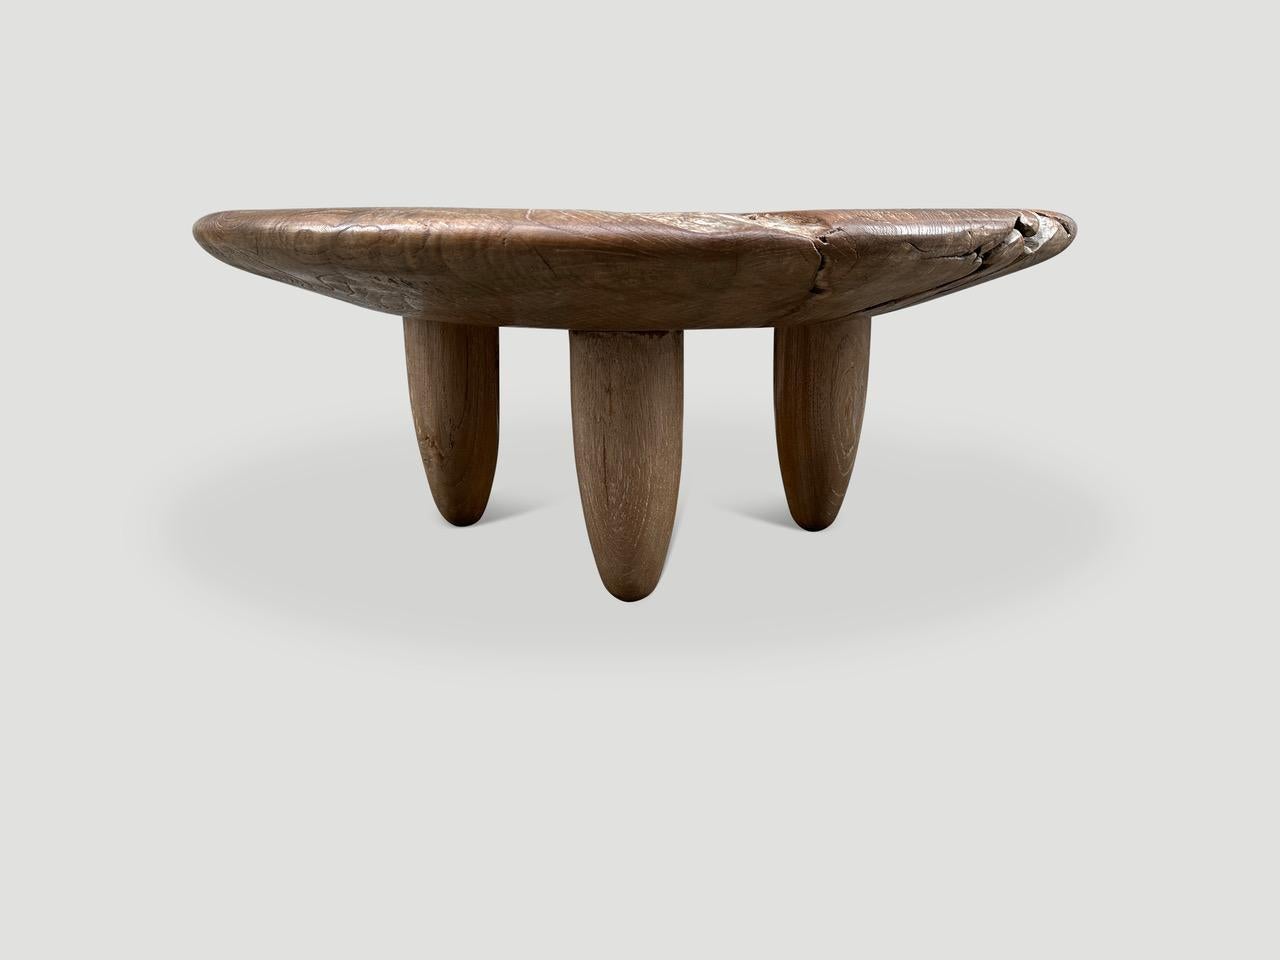 An impressive single slab of teak wood taken from my finest collection is hand carved to produce this one of a kind coffee table with deep bevelled rounded sides. We added four mid century style cone legs and finished the top with a translucent grey